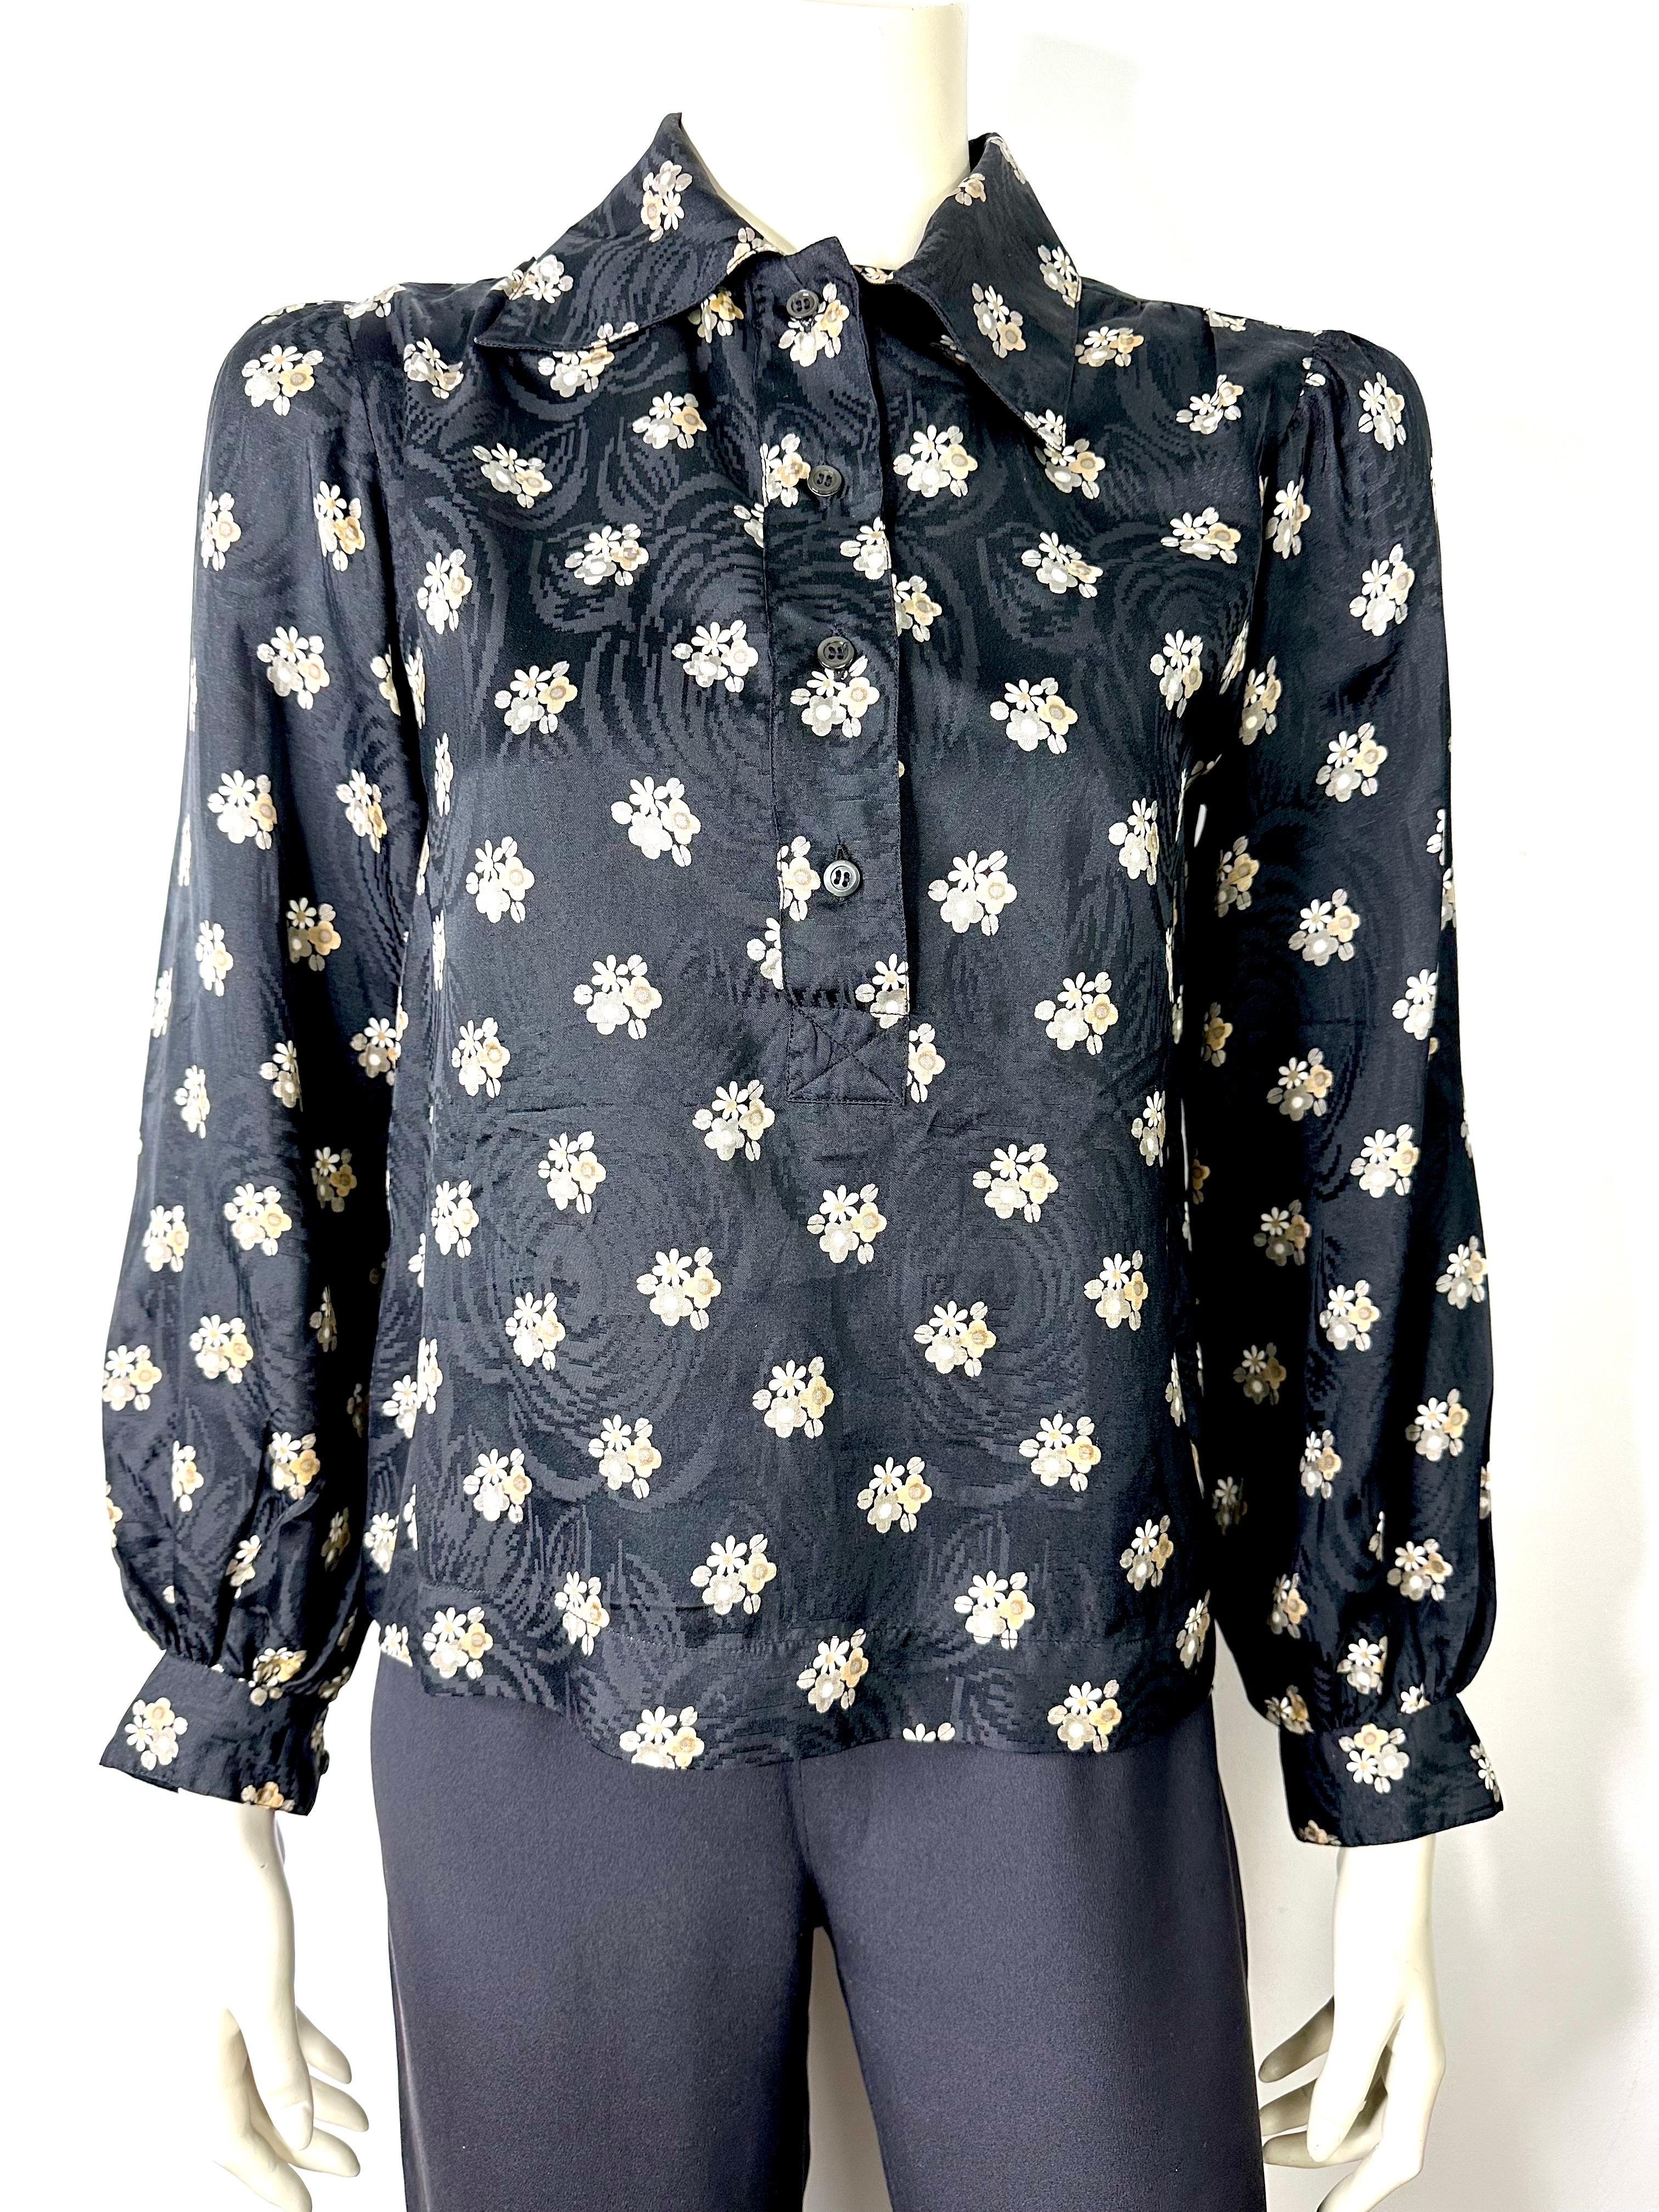 1970s Yves saint Laurent rive gauche blouse in black silk damask with flower motifs.
Buttoning under the chest.
Sleeves tightened and buttoned at cuffs.
Size 36 please refer to measurements
Shoulder 35cm
Chest width 47cm
Length 54cm
Sleeve length